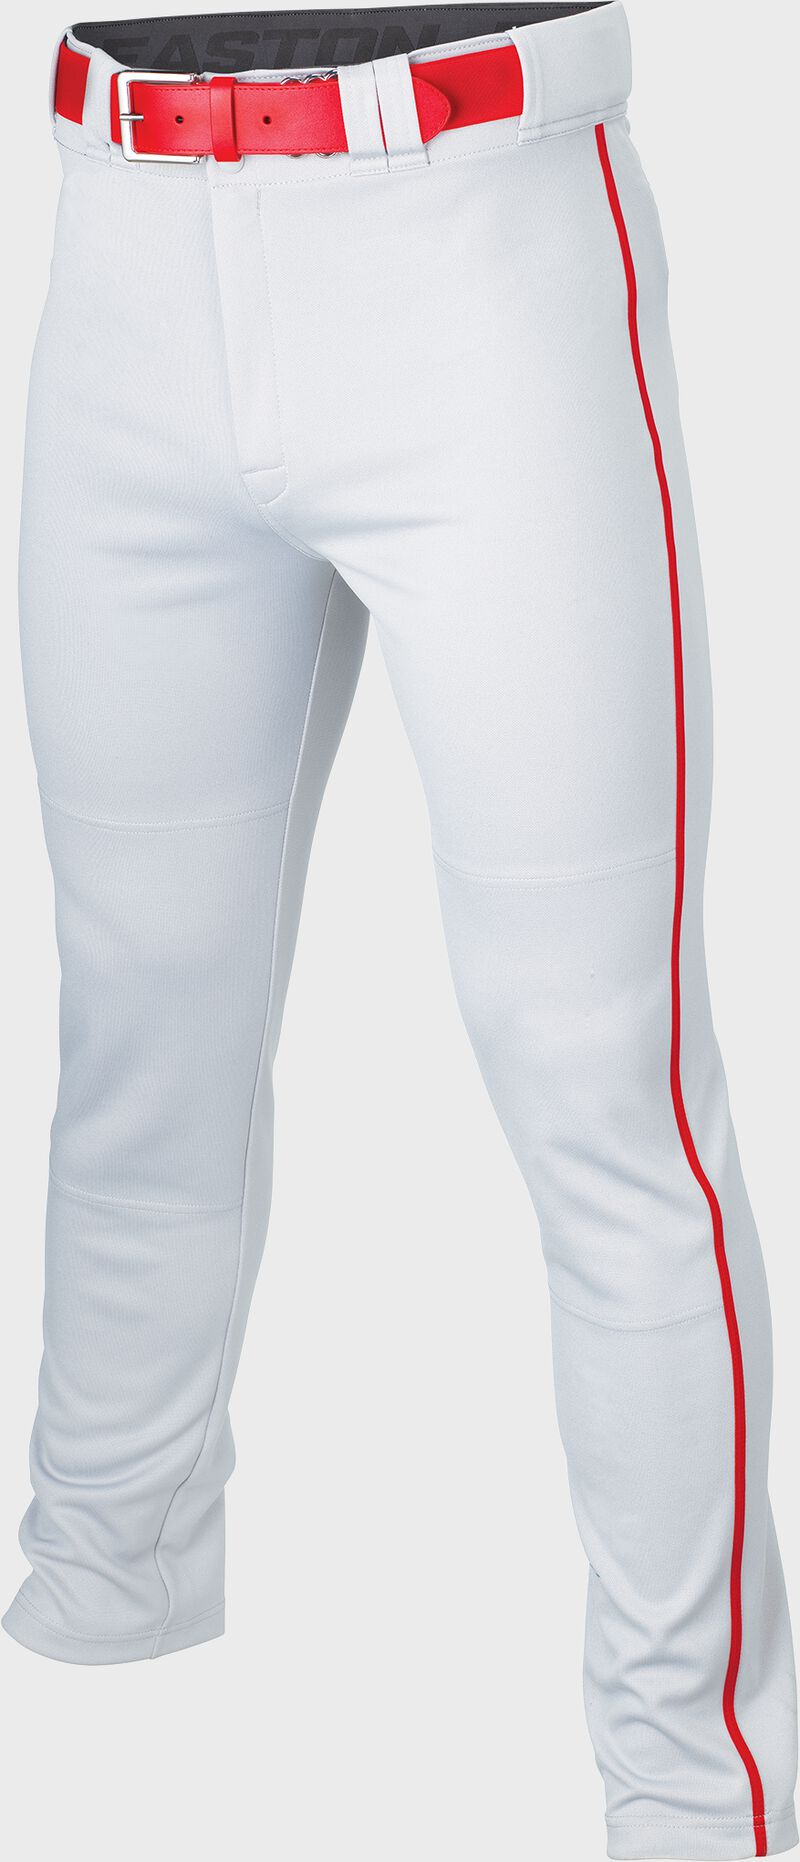 RIVAL+ PANT ADULT PIPED WHITE/RED M loading=